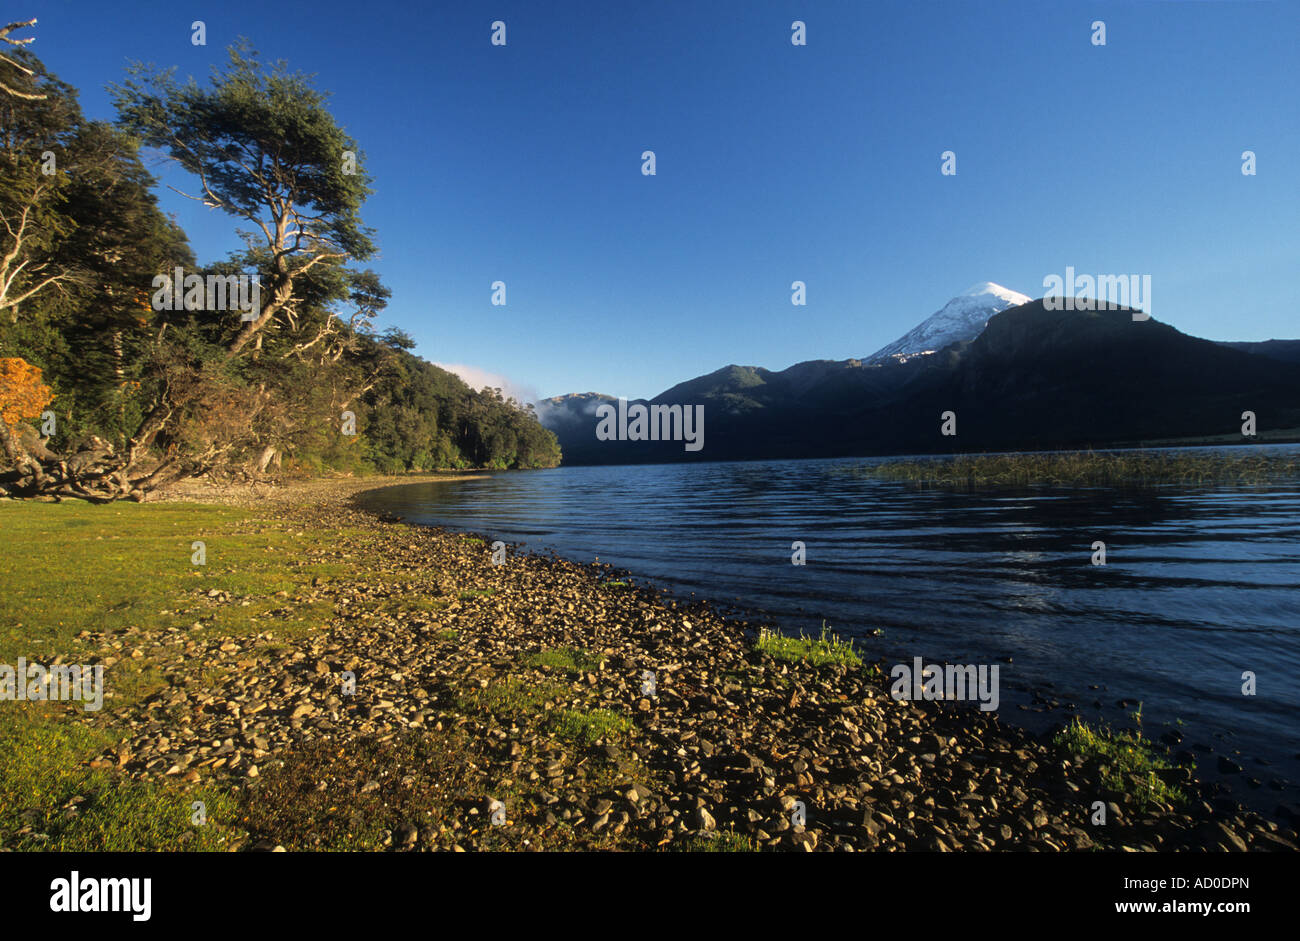 Southern beech or nothofagus forest on shore of Lake Paimun, Lanin volcano in background, Lanin National Park, Argentina Stock Photo